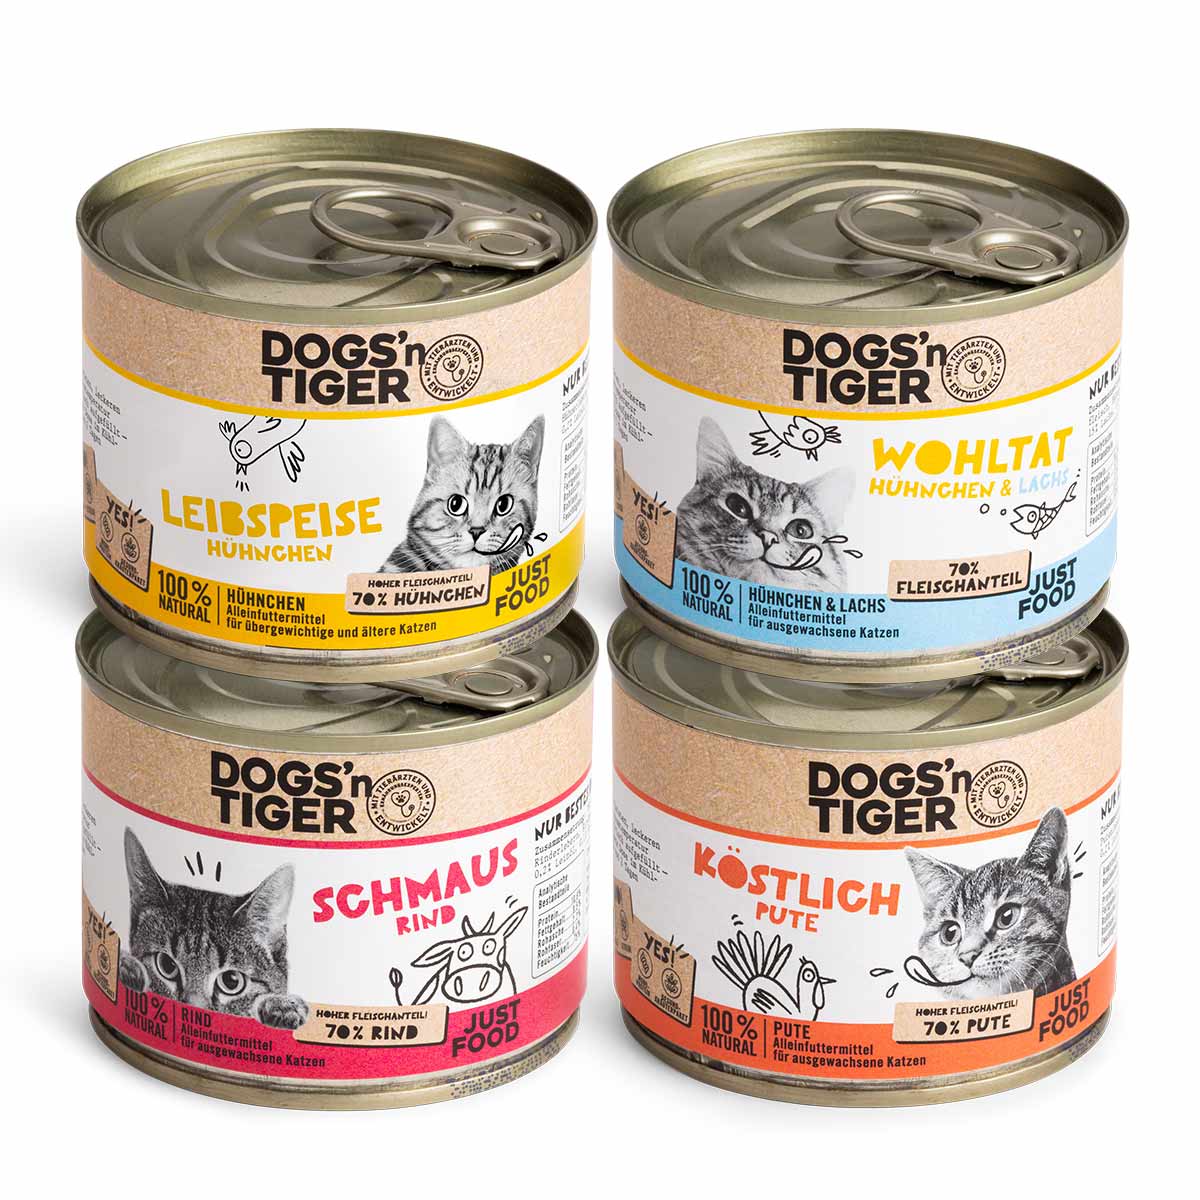 Dogs'n Tiger Mixpaket Rind Huhn Pute Lachs 24x200g von Dogs'n Tiger